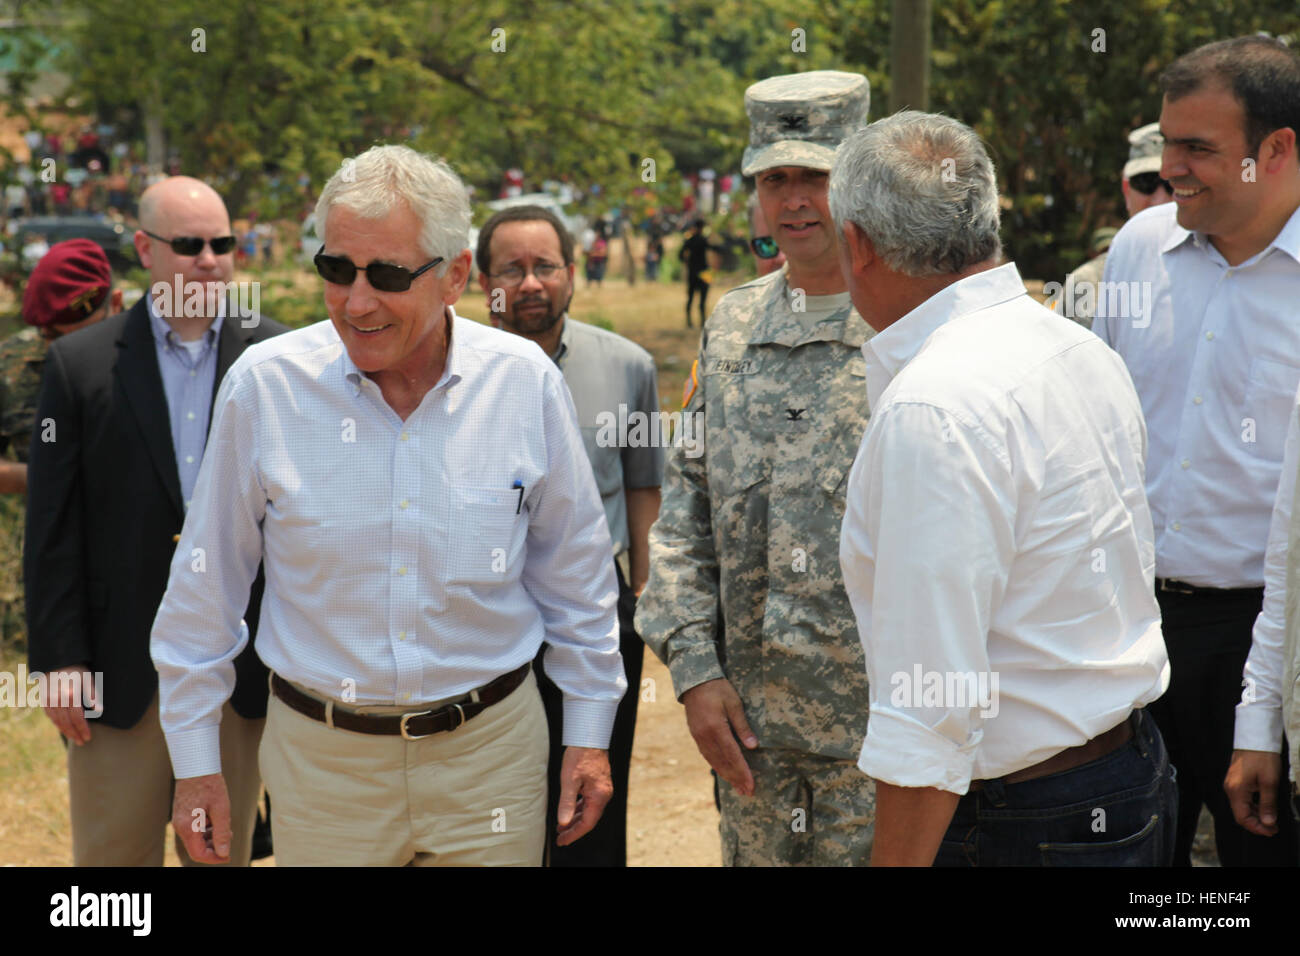 U.S. Secretary of Defense Chuck Hagel and Guatemalan President Otto Perez Molina view the progress of a school construction site during Operation Beyond the Horizon 2014, Zacapa, Guatemala, Apr. 25, 2014. Beyond the Horizon is an annual exercise that embraces the partnership between the United States and Guatemala, to provide focused humanitarian assistance through various medical, dental, and civic action programs. (U.S. Army photo by Spc. Gary Silverman)(Released) Beyond The Horizon 2014, Guatemala 140424-A-TO648-389 Stock Photo